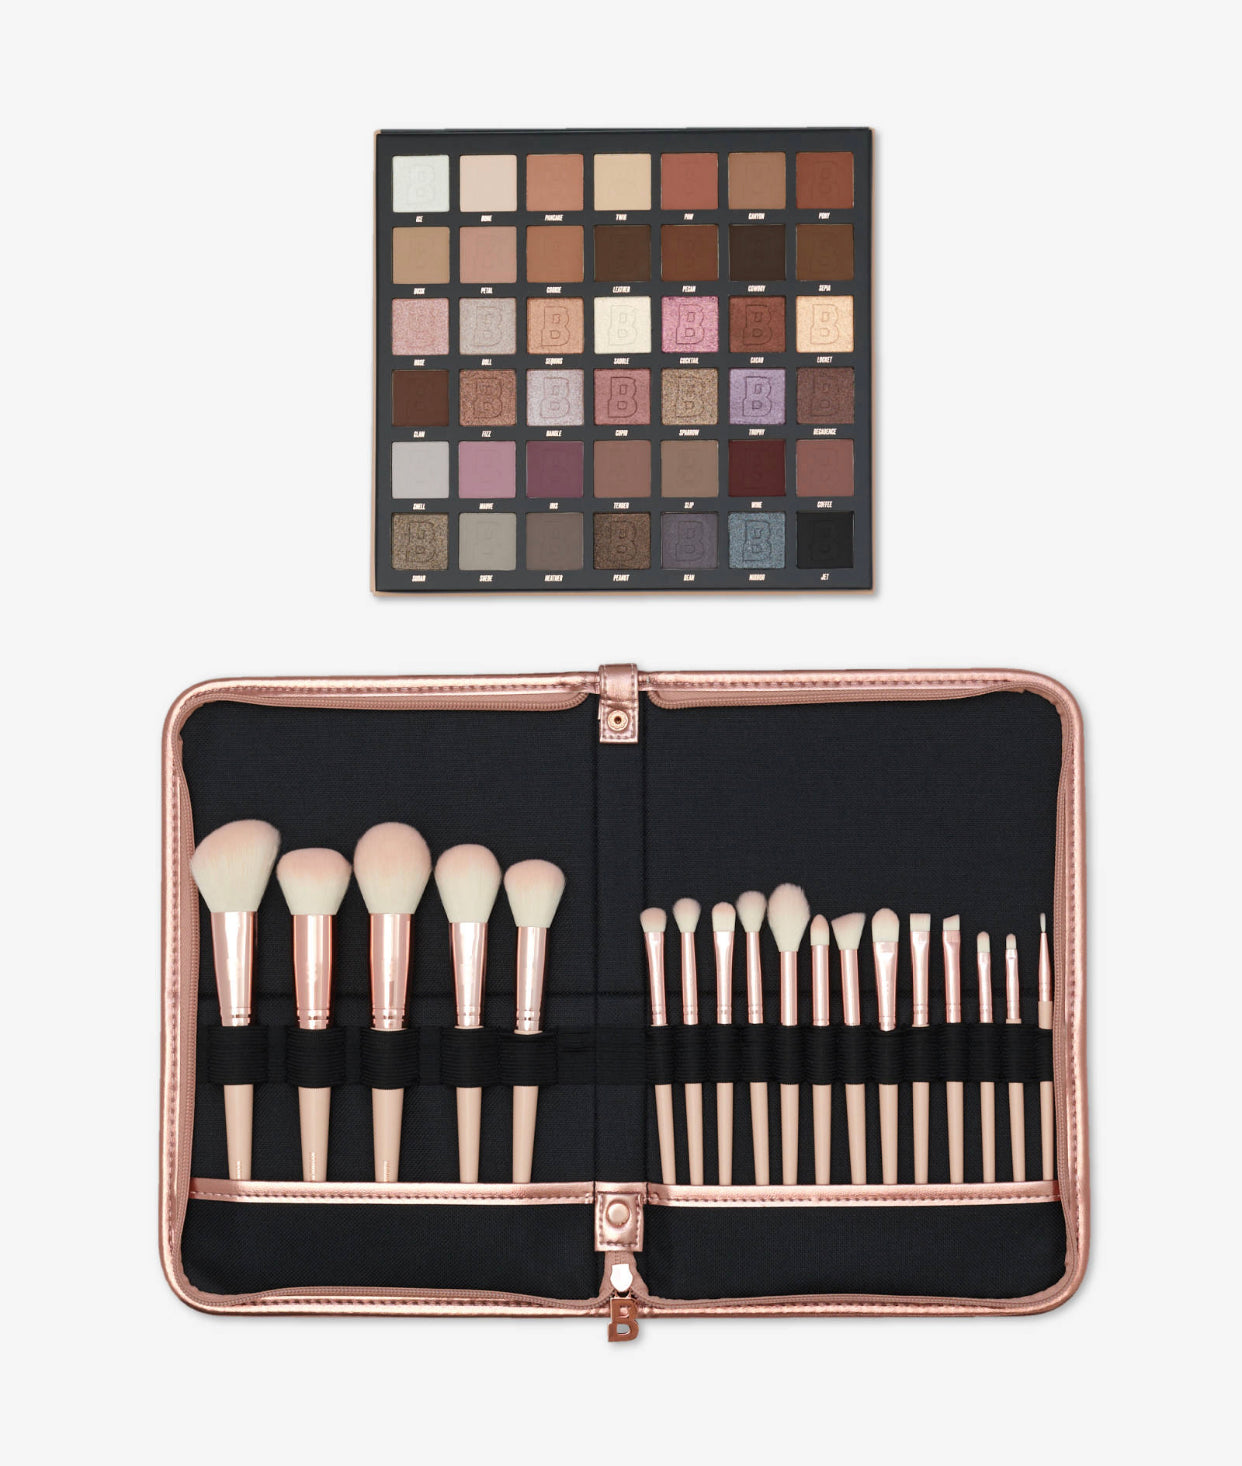 BY BEAUTY BAY, ROSE GLOW BRUSH SET & NEUTRAL 42 DUO